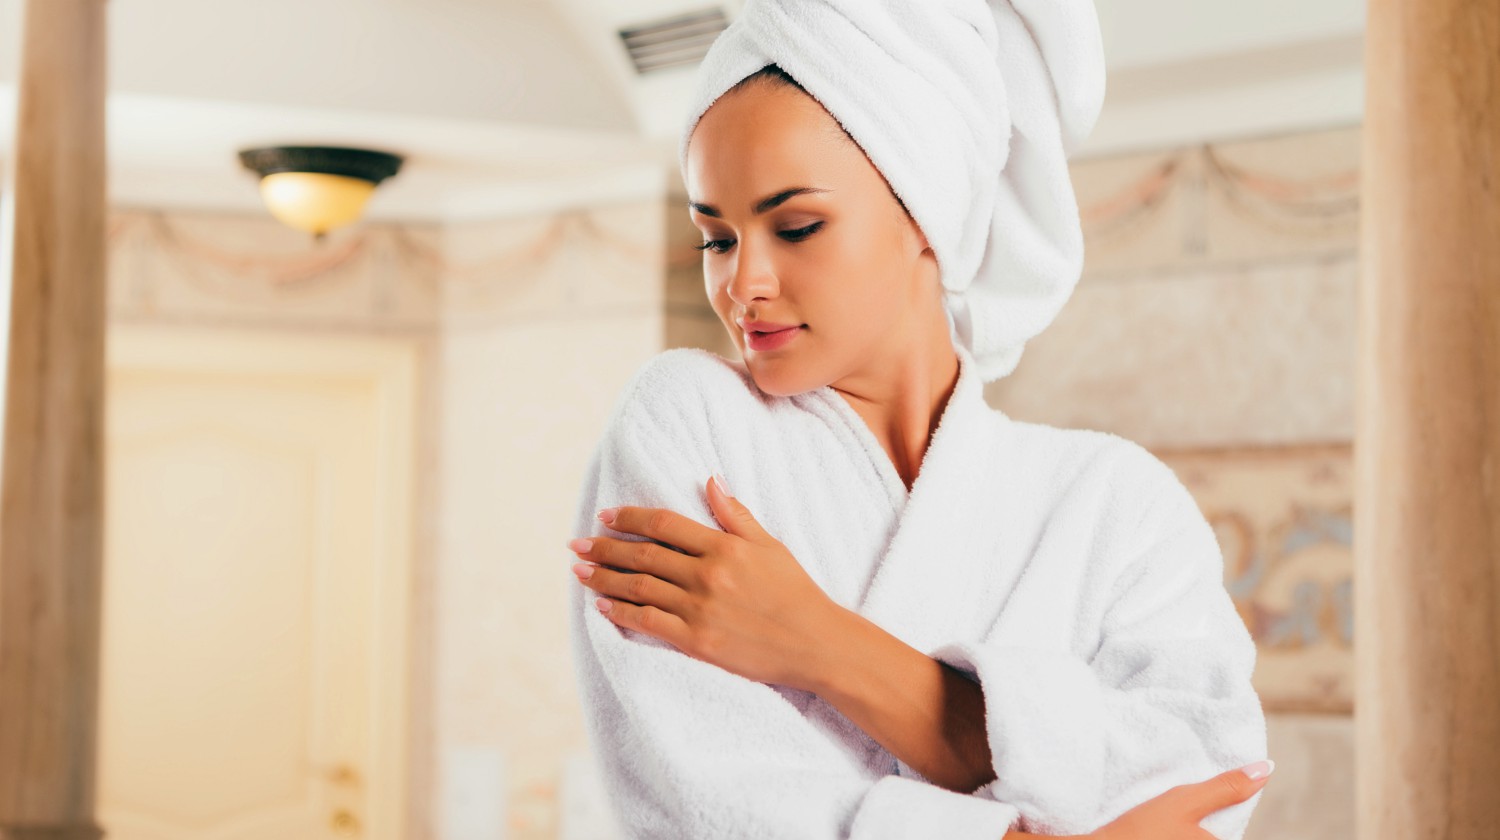 Featured | Utlimate Bathrobe Guide | How To Find And Care For Your Robe